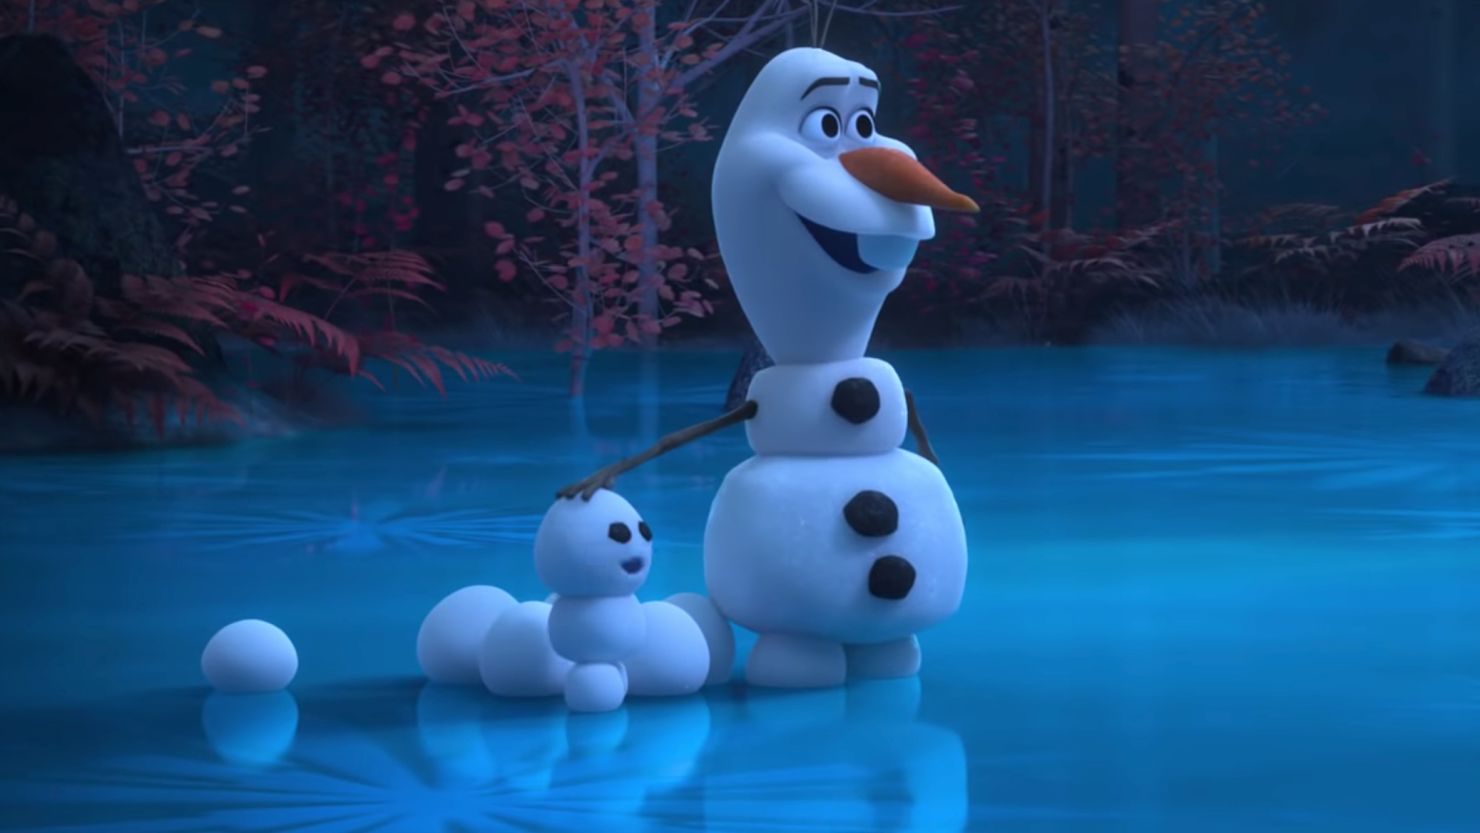  ''At Home With Olaf'